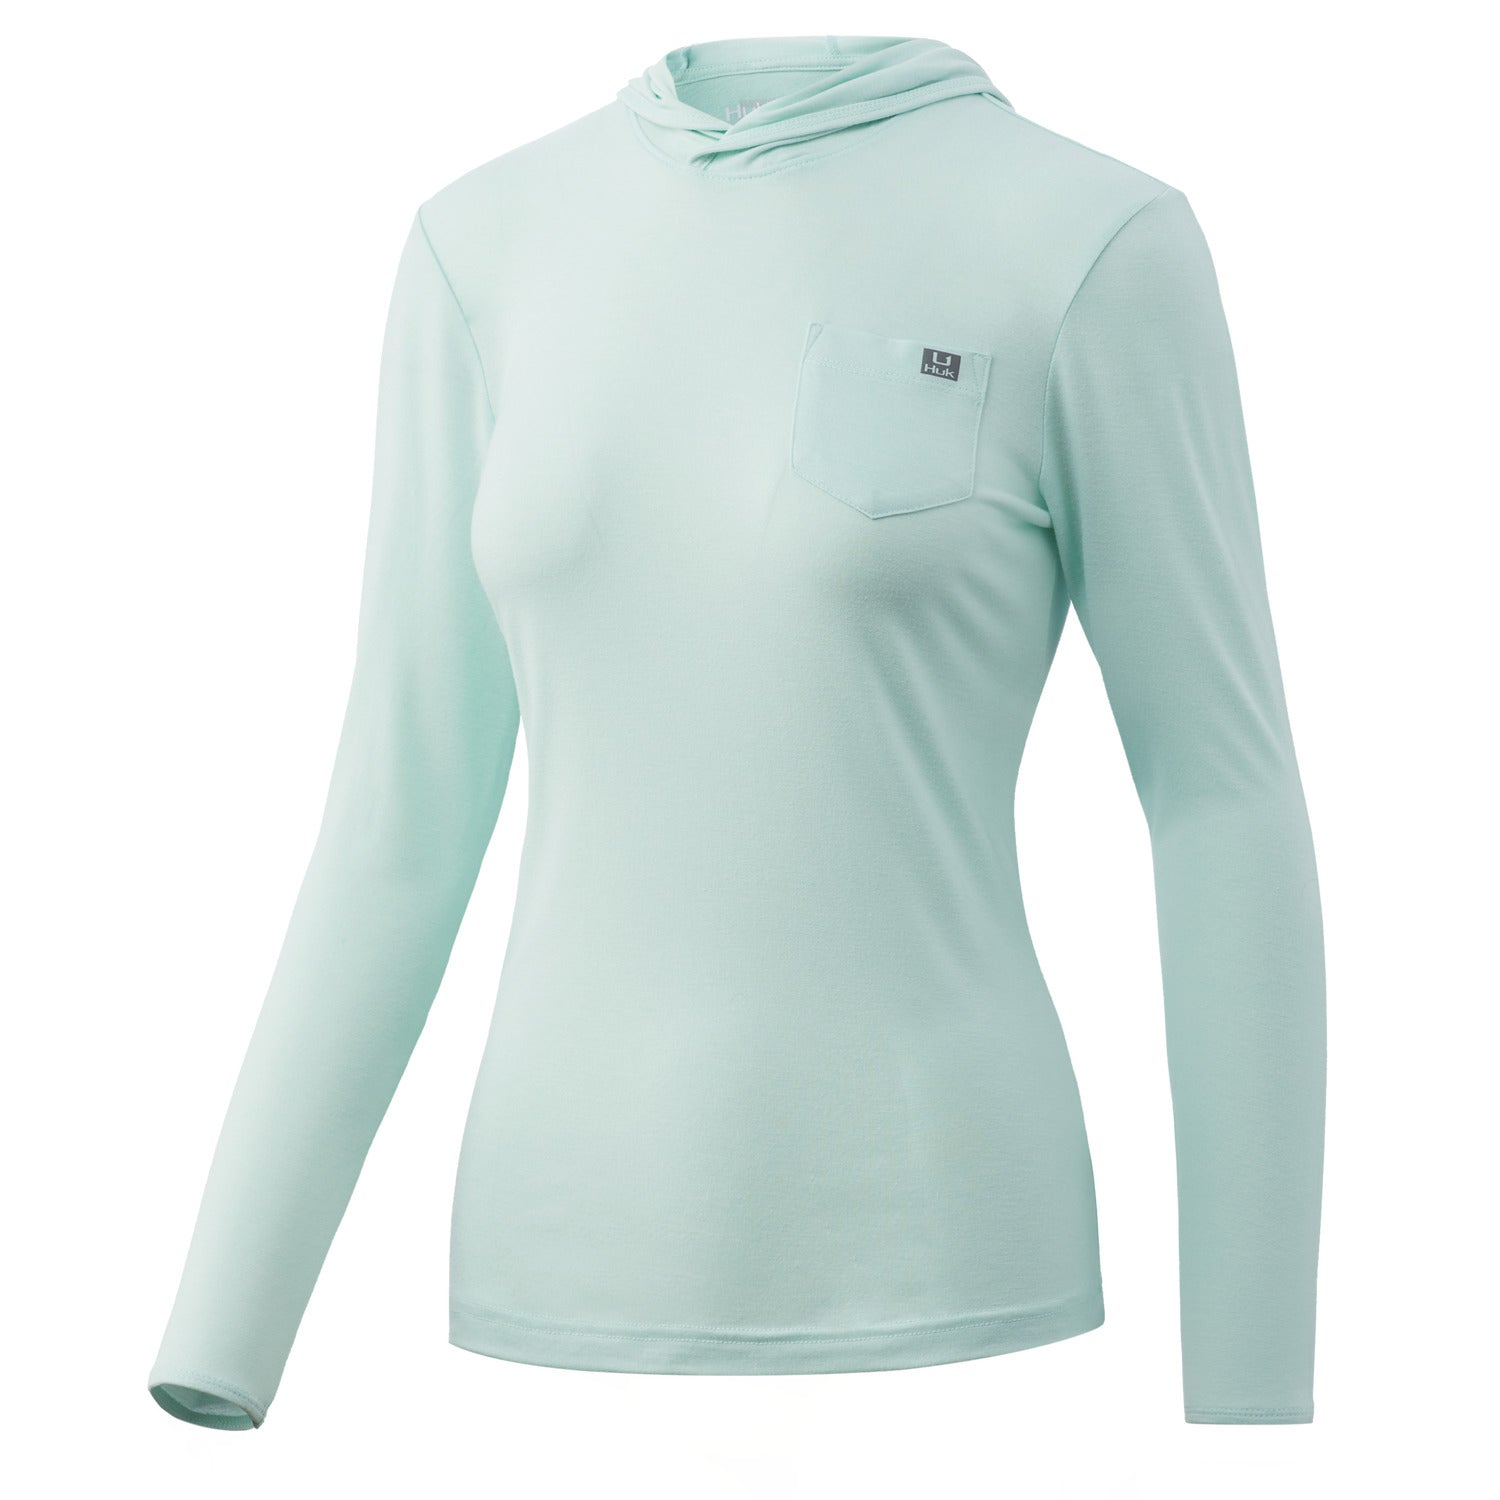 W Huk Waypoint Hoodie in Seafoam color from the front